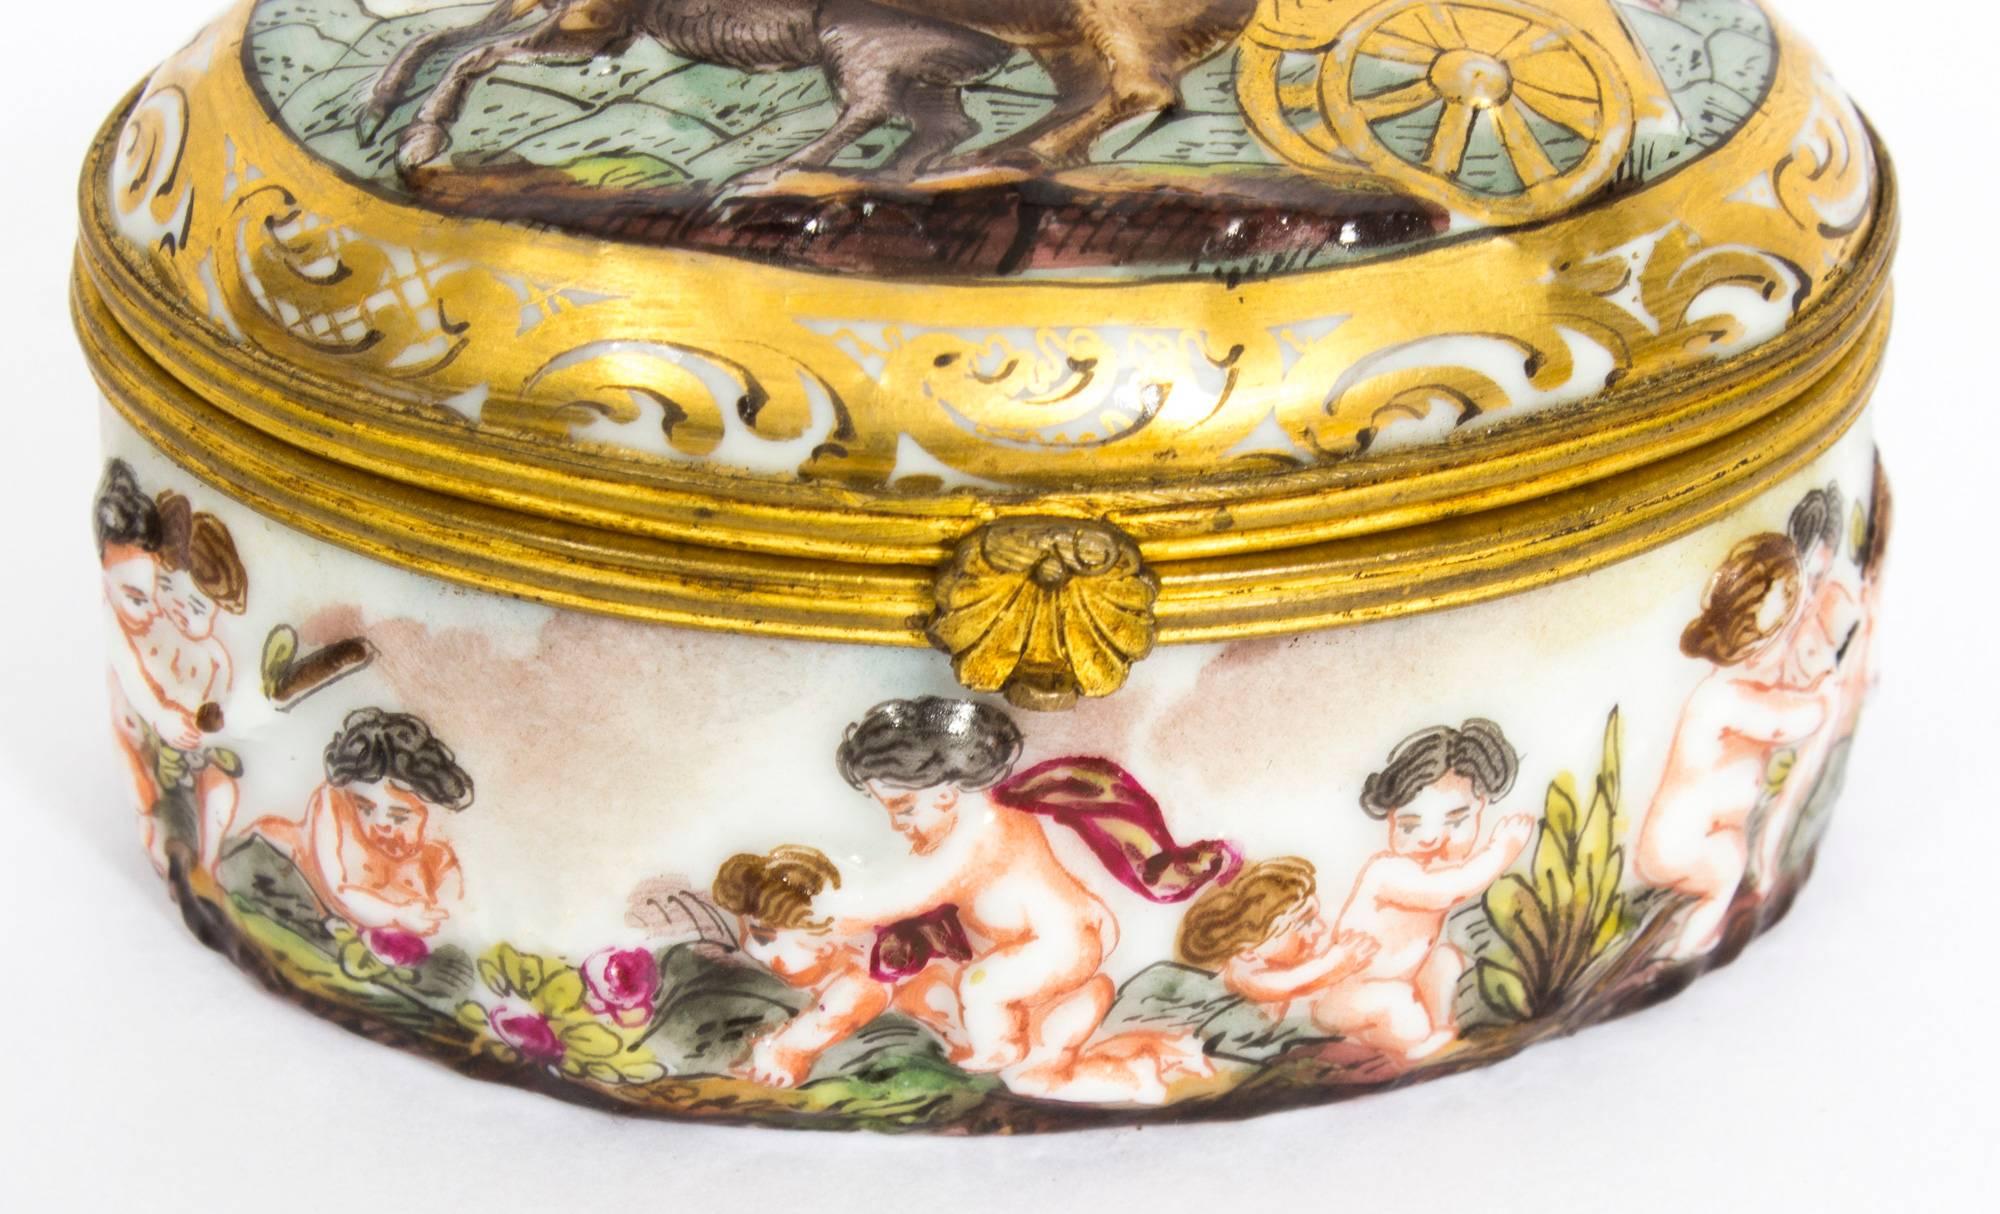 This is a beautiful antique Italian Capodimonte porcelain pill box, 1890 in date. 

It features a chariot scene on the lid, the sides are lavishly decorated with playful putti and it has an attractive omolu border.

The scenes are hand-painted